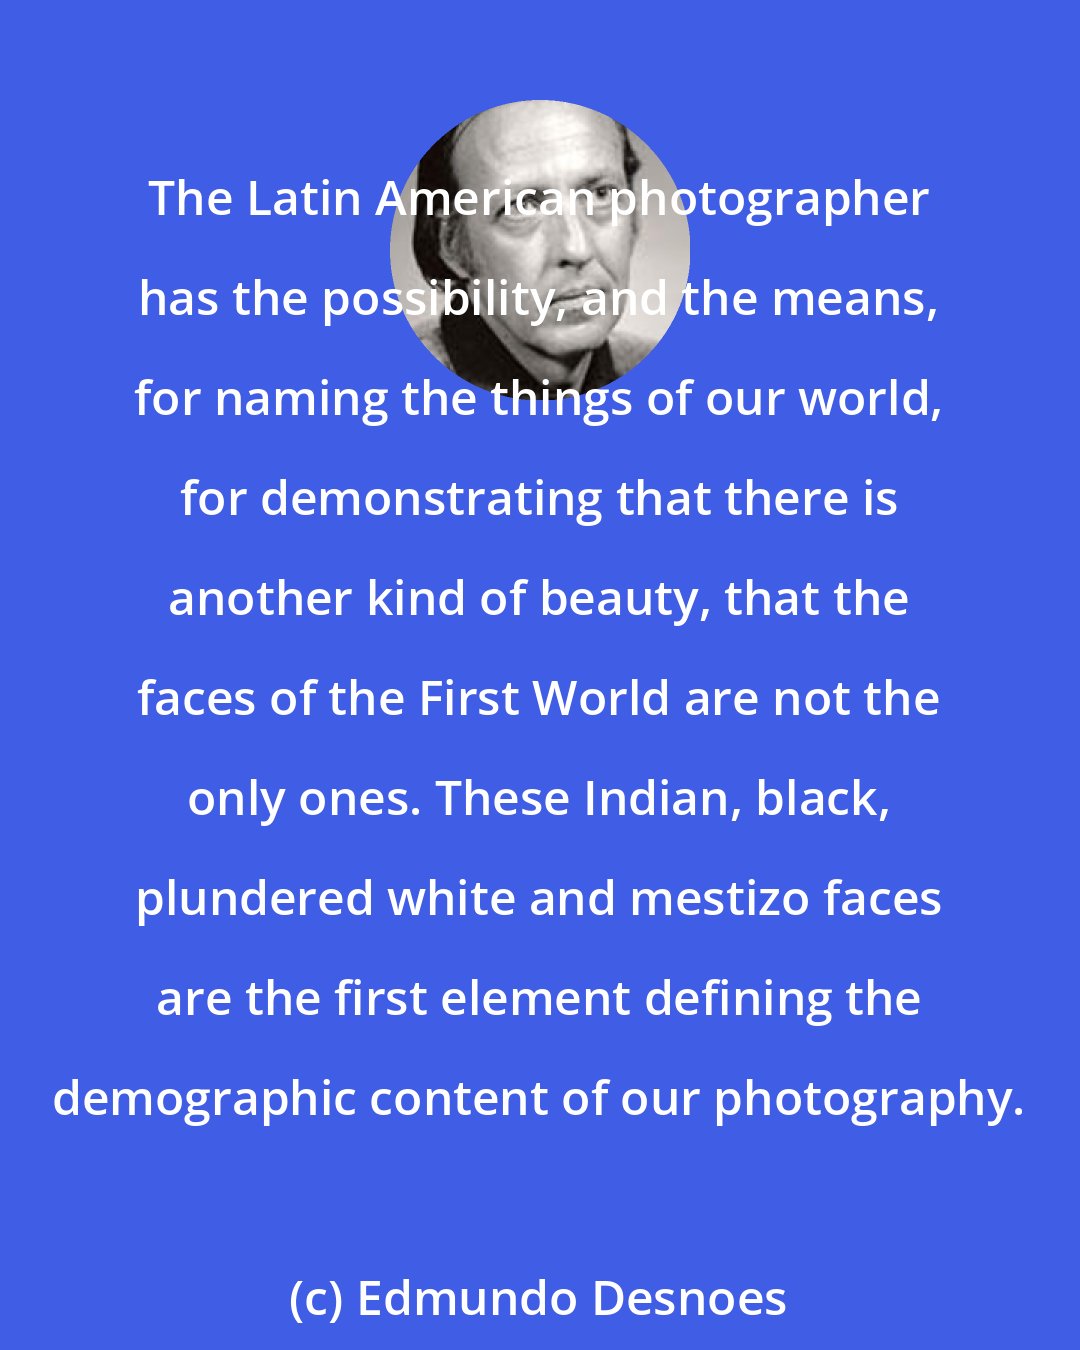 Edmundo Desnoes: The Latin American photographer has the possibility, and the means, for naming the things of our world, for demonstrating that there is another kind of beauty, that the faces of the First World are not the only ones. These Indian, black, plundered white and mestizo faces are the first element defining the demographic content of our photography.